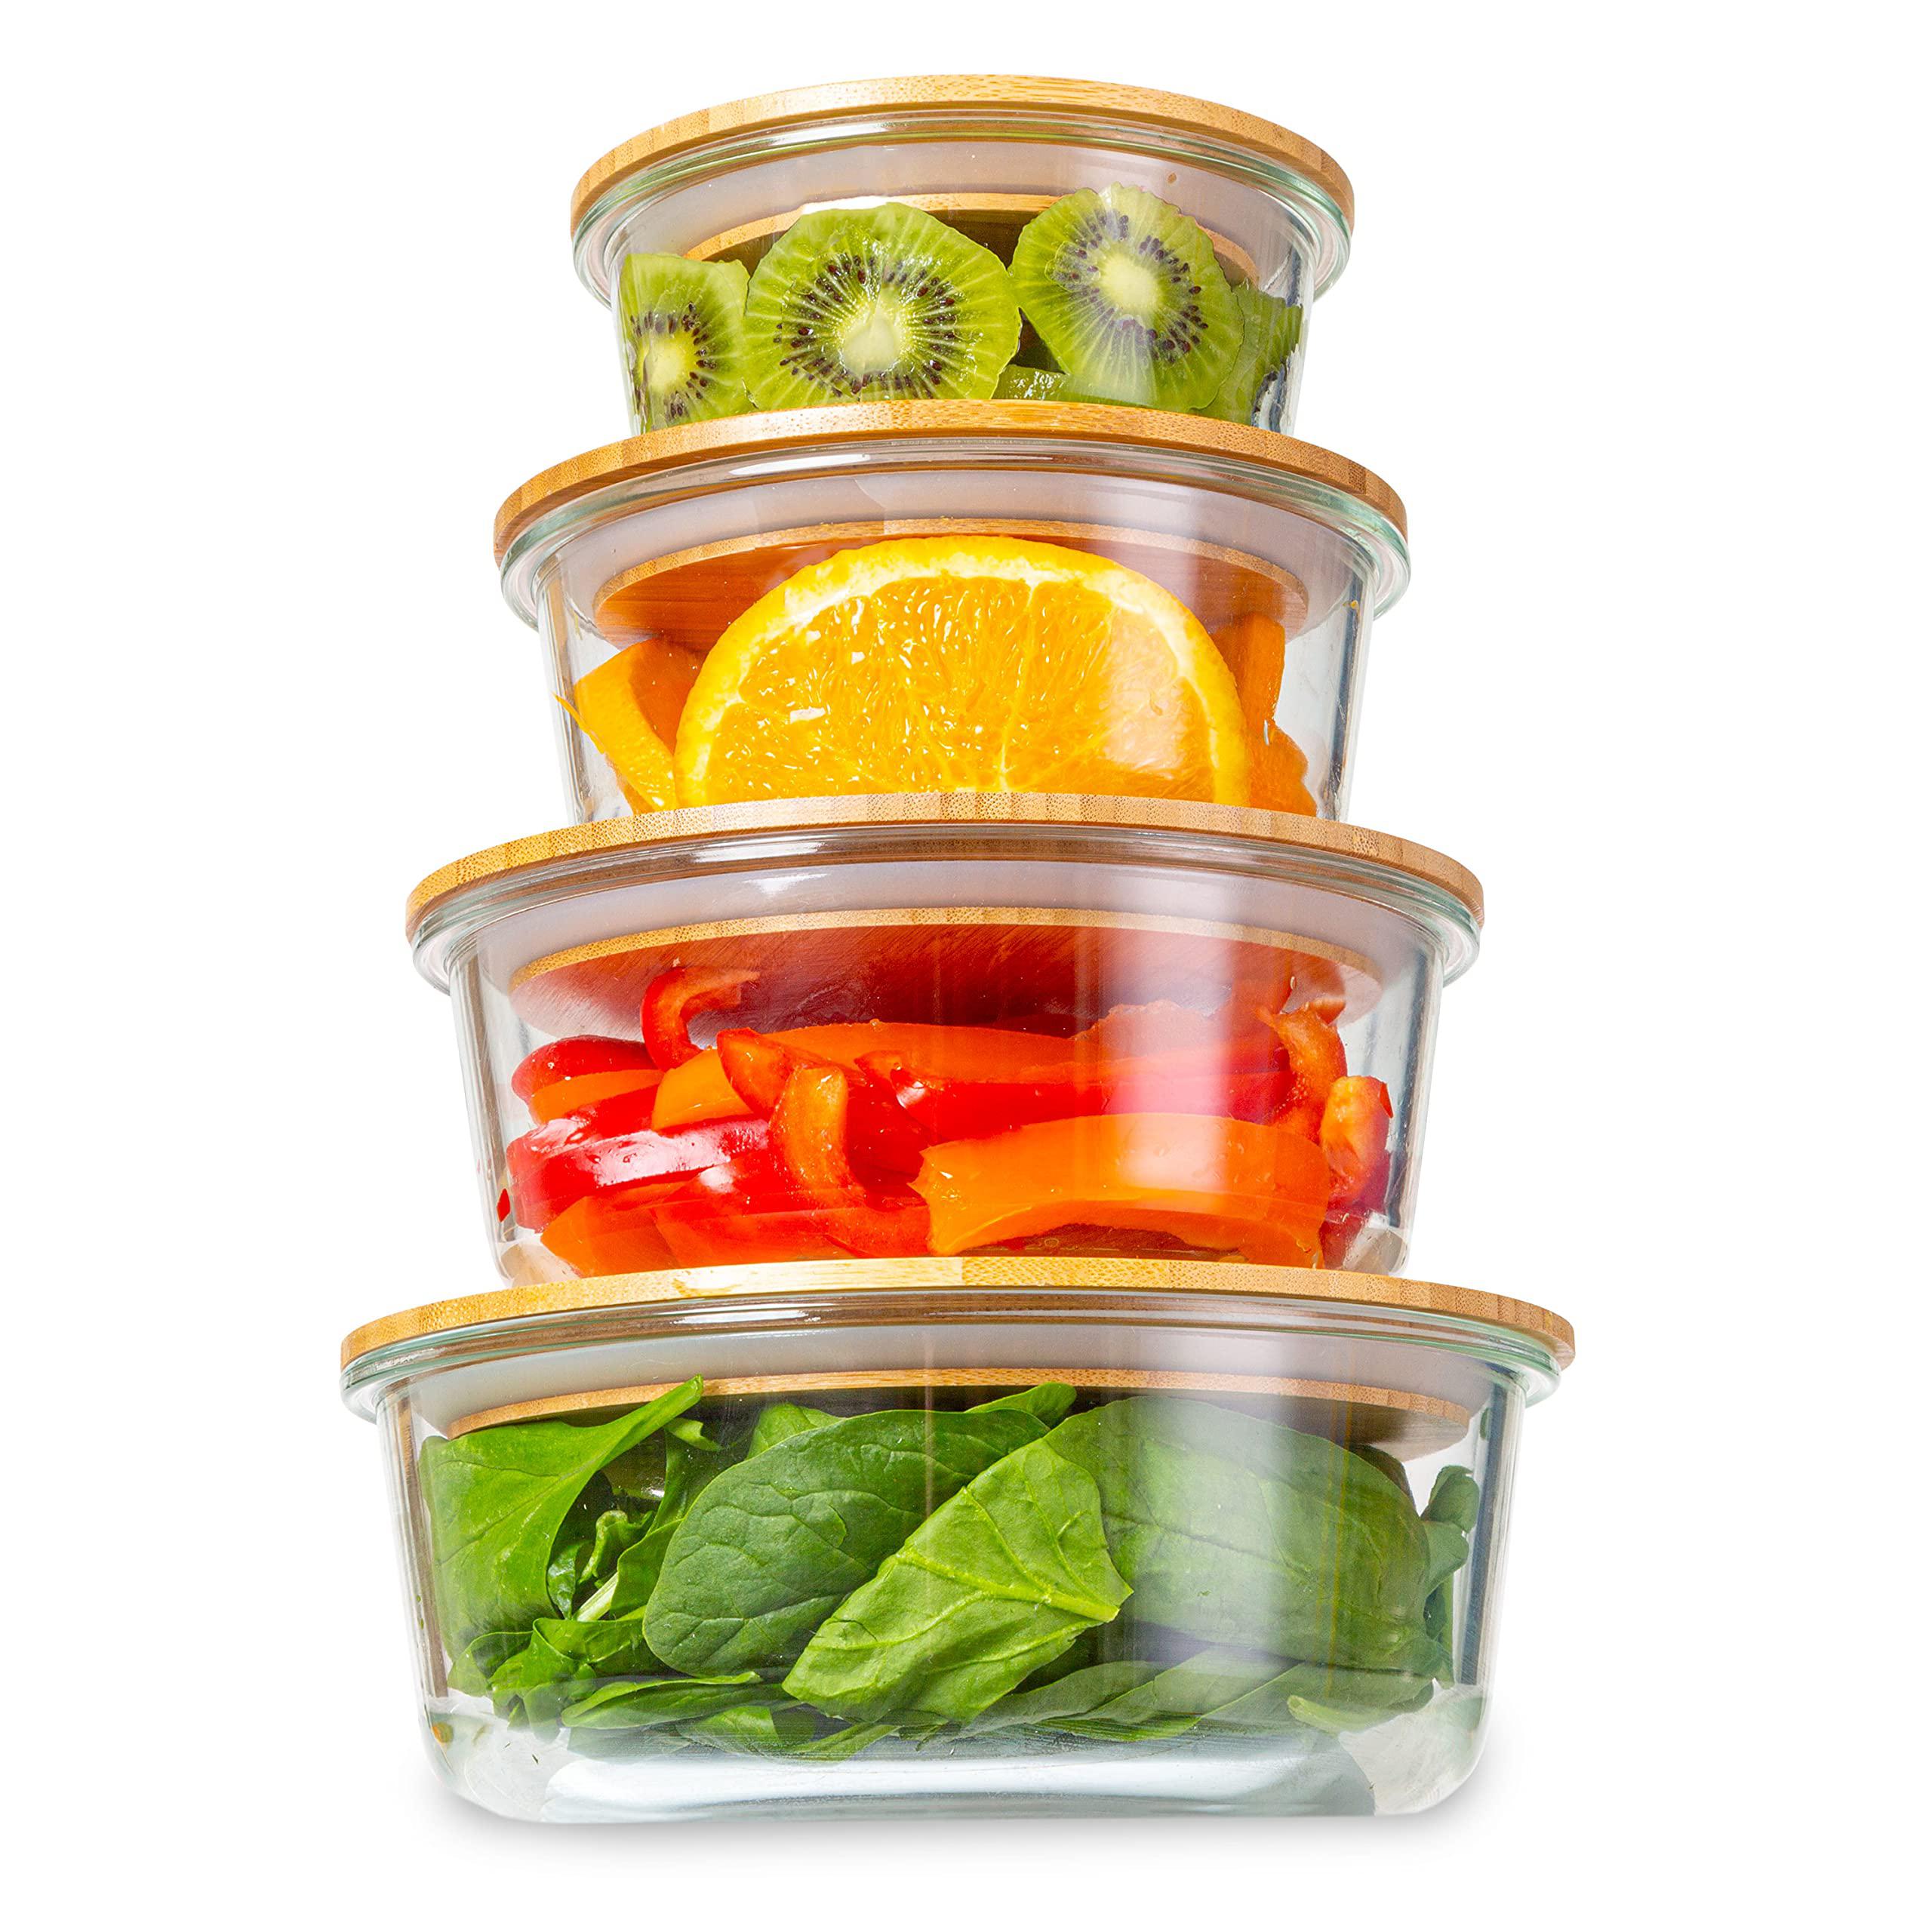 Crutello Glass Meal Prep Containers with Bamboo Lids, 4 Pack - Airtight Clear Food Storage Canisters for Kitchen Organization